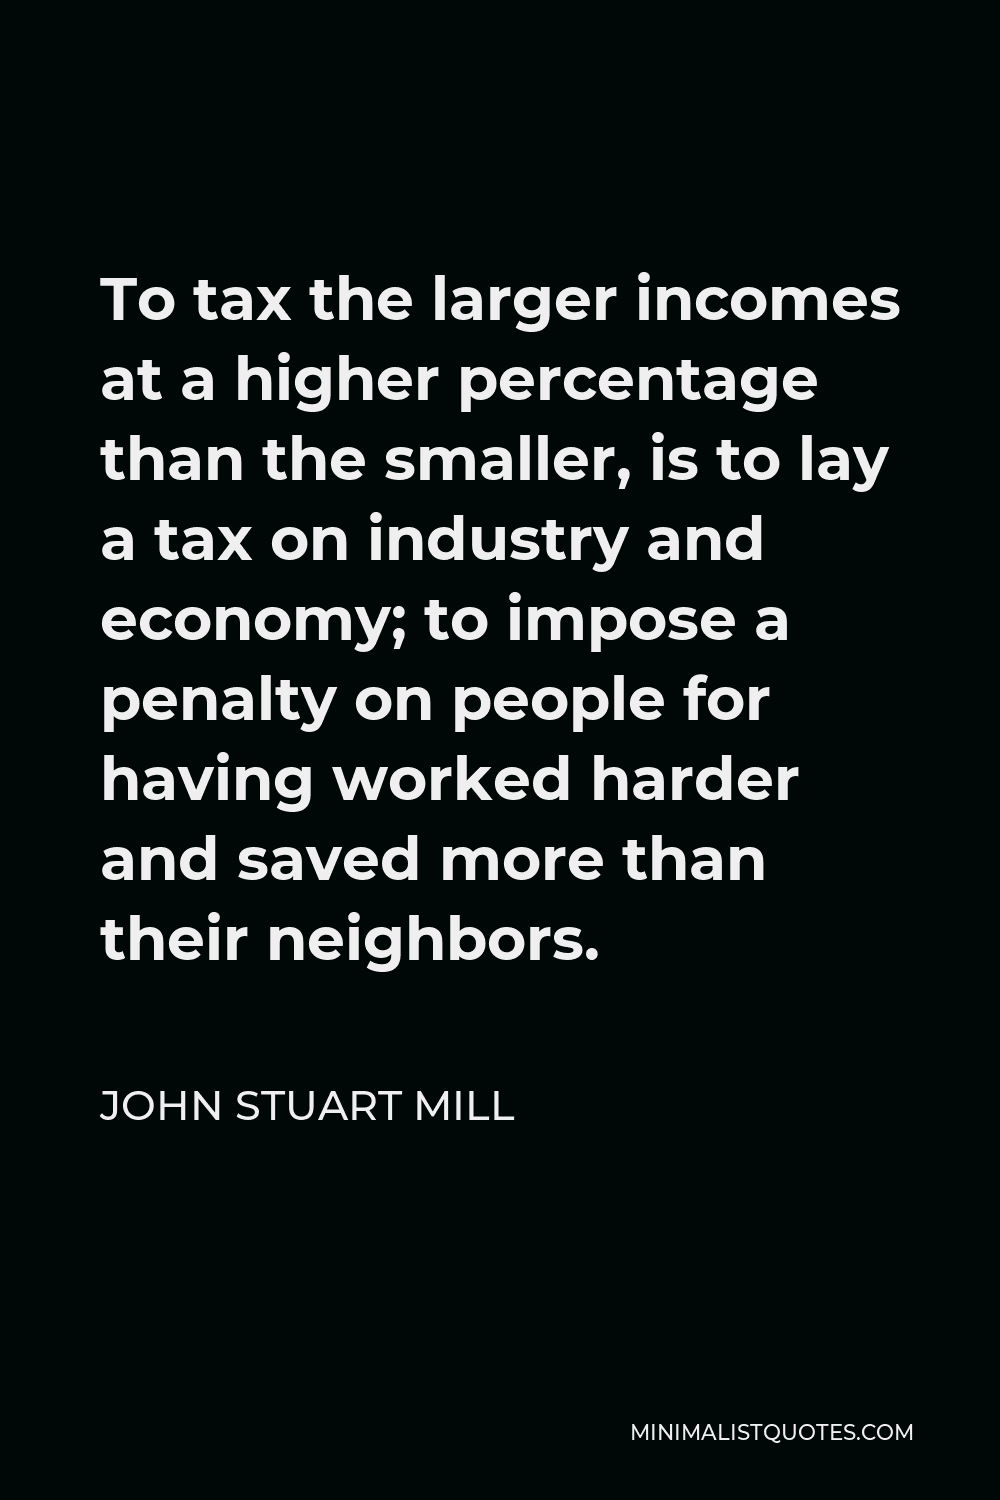 John Stuart Mill Quote - To tax the larger incomes at a higher percentage than the smaller, is to lay a tax on industry and economy; to impose a penalty on people for having worked harder and saved more than their neighbors.